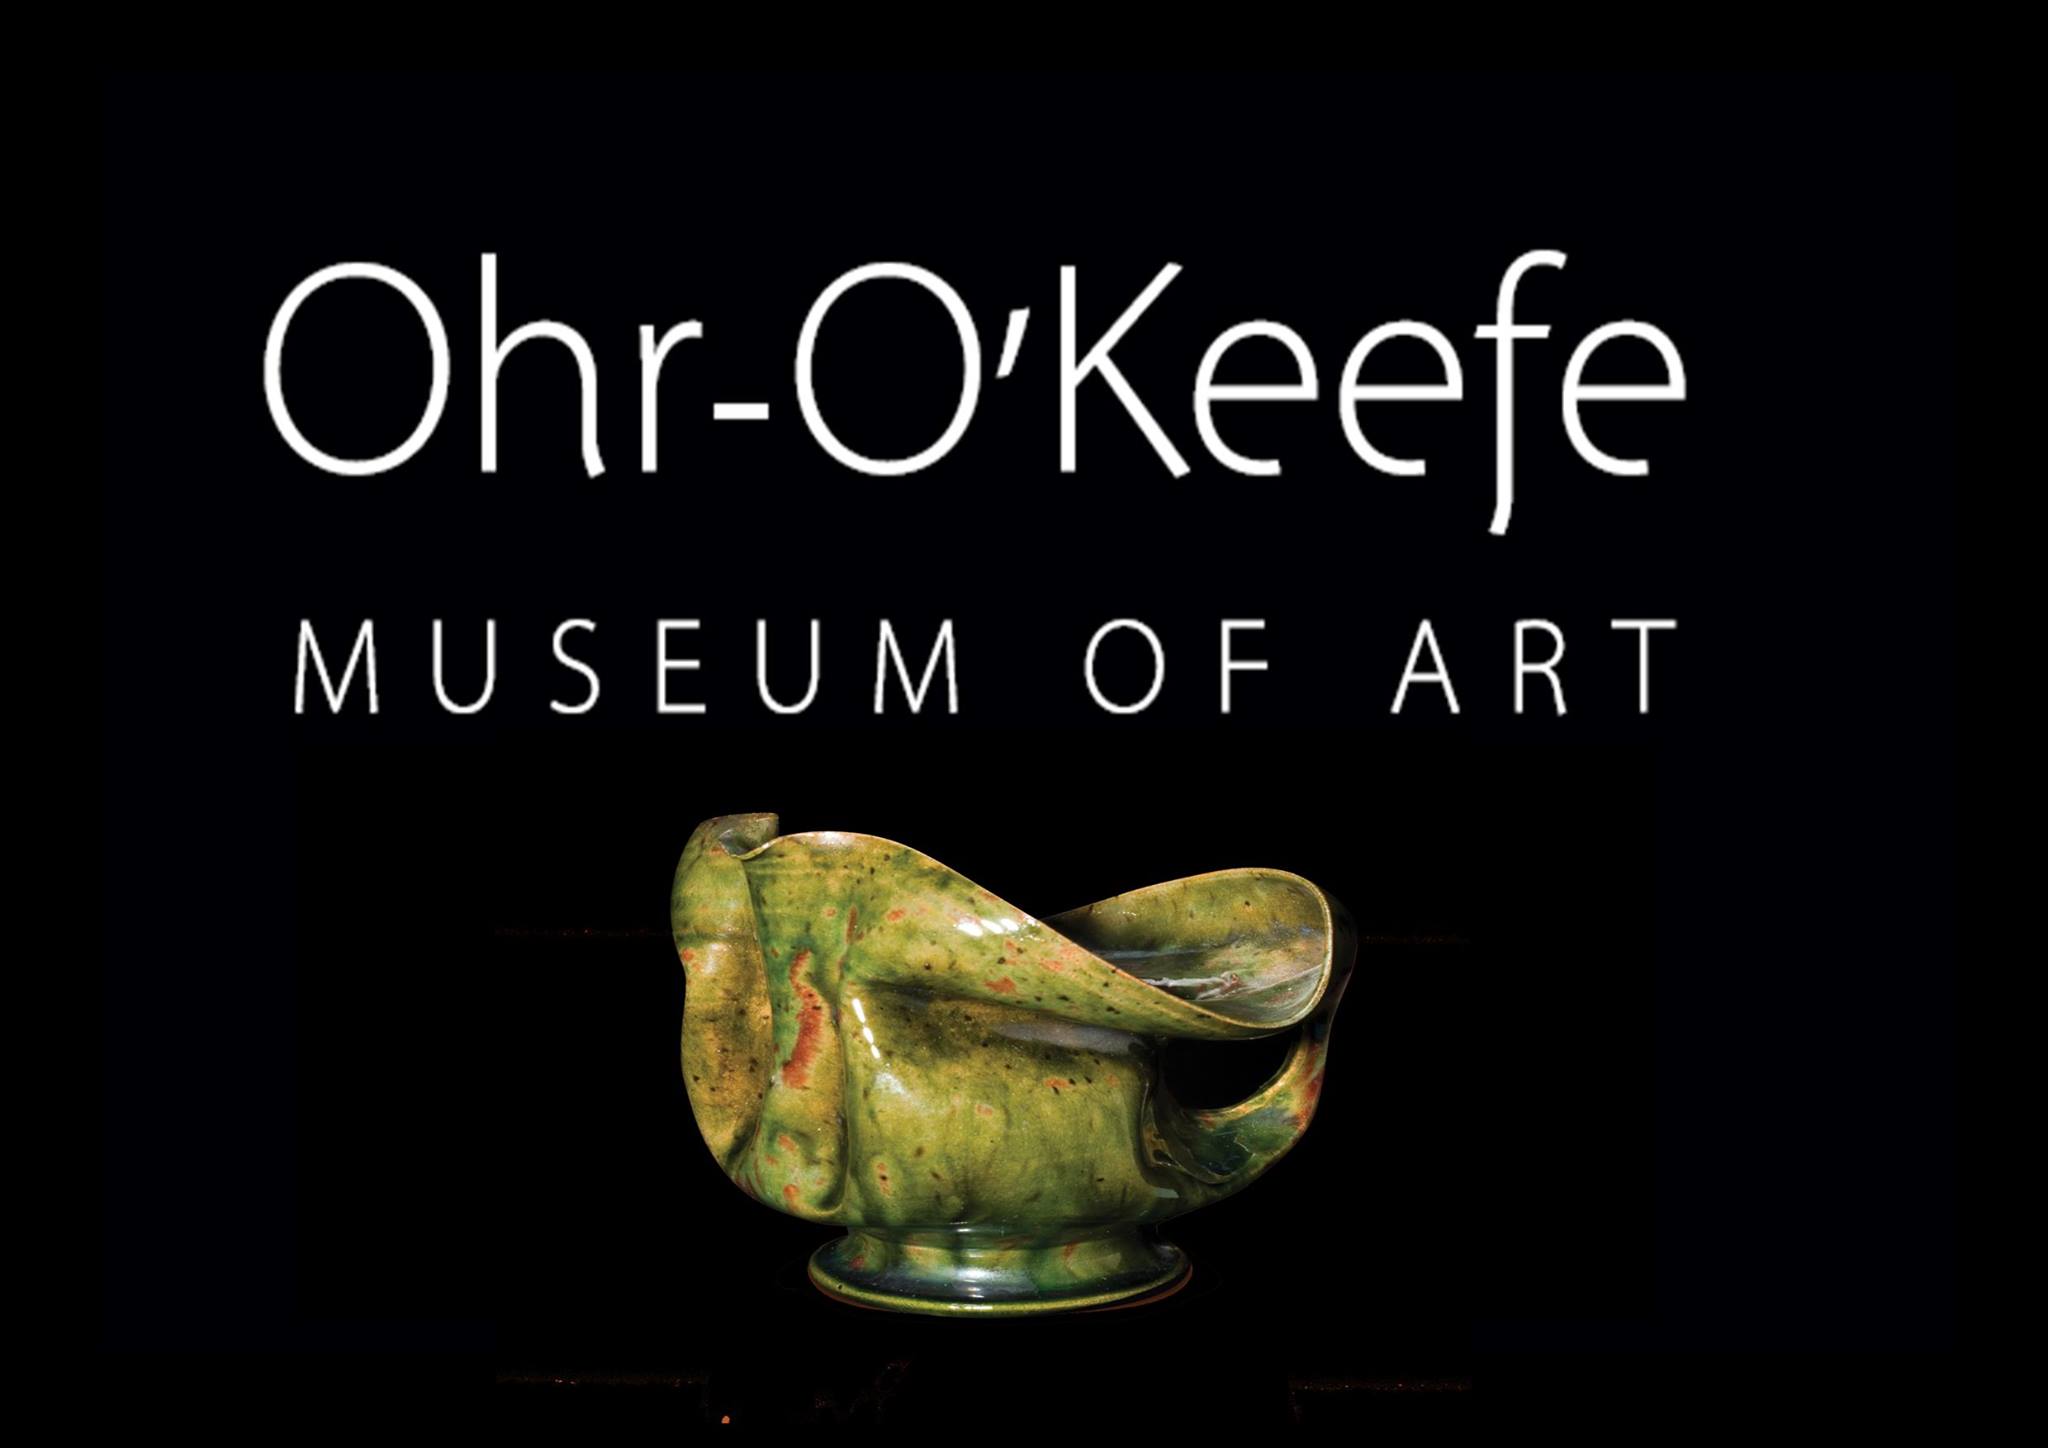 Ooma Logo - OOMA Logo - Ohr O'Keefe Museum of Art